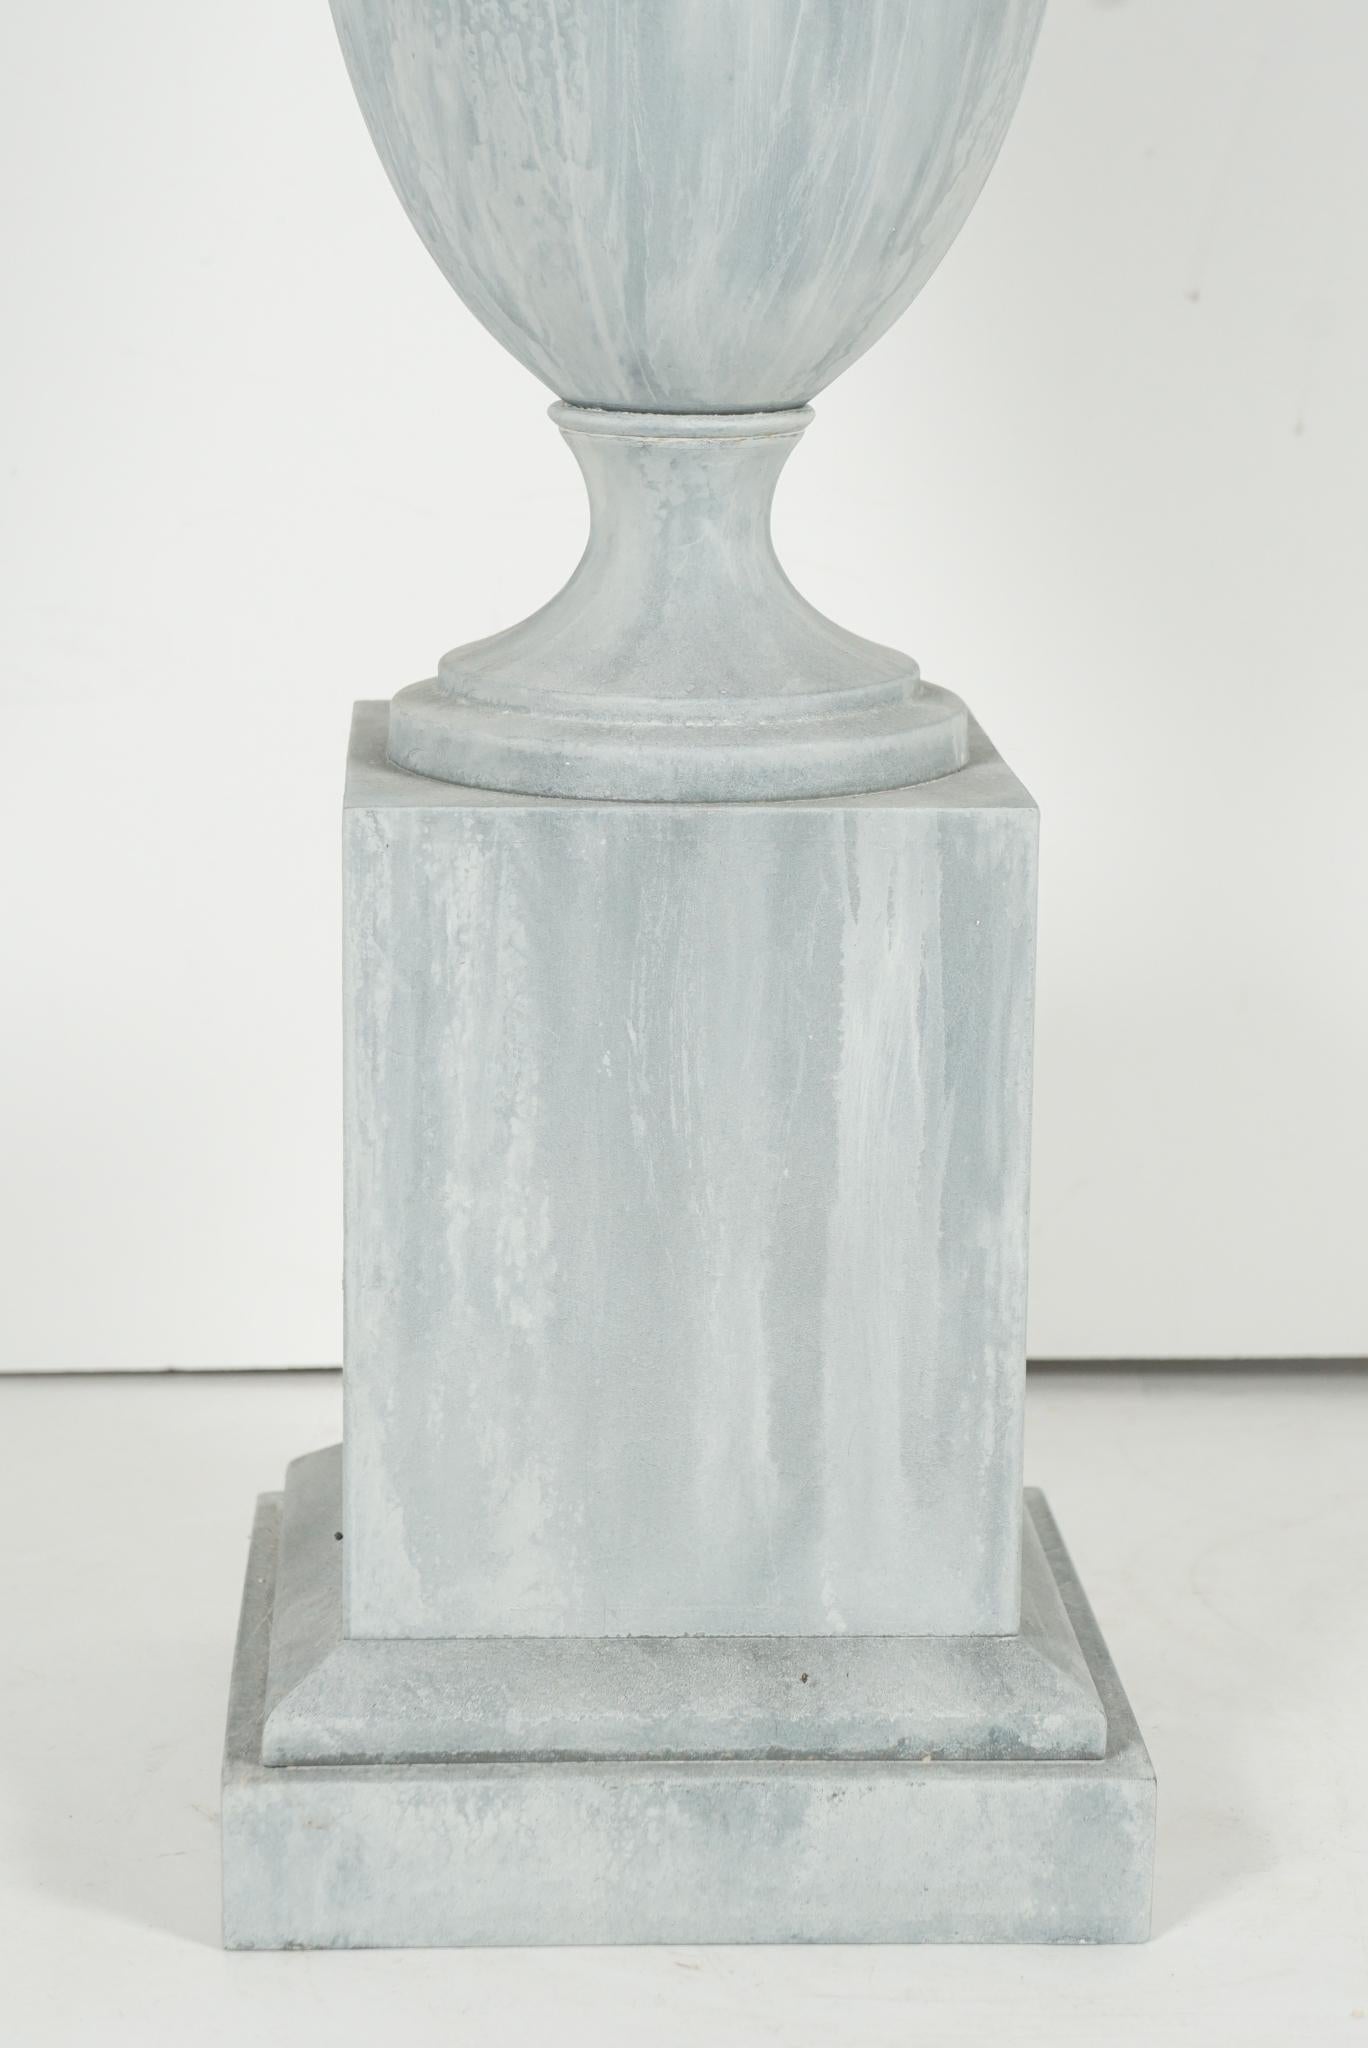 Early 20th Century French Zinc Urn Lamp from the Estate of Bunny Mellon For Sale 1